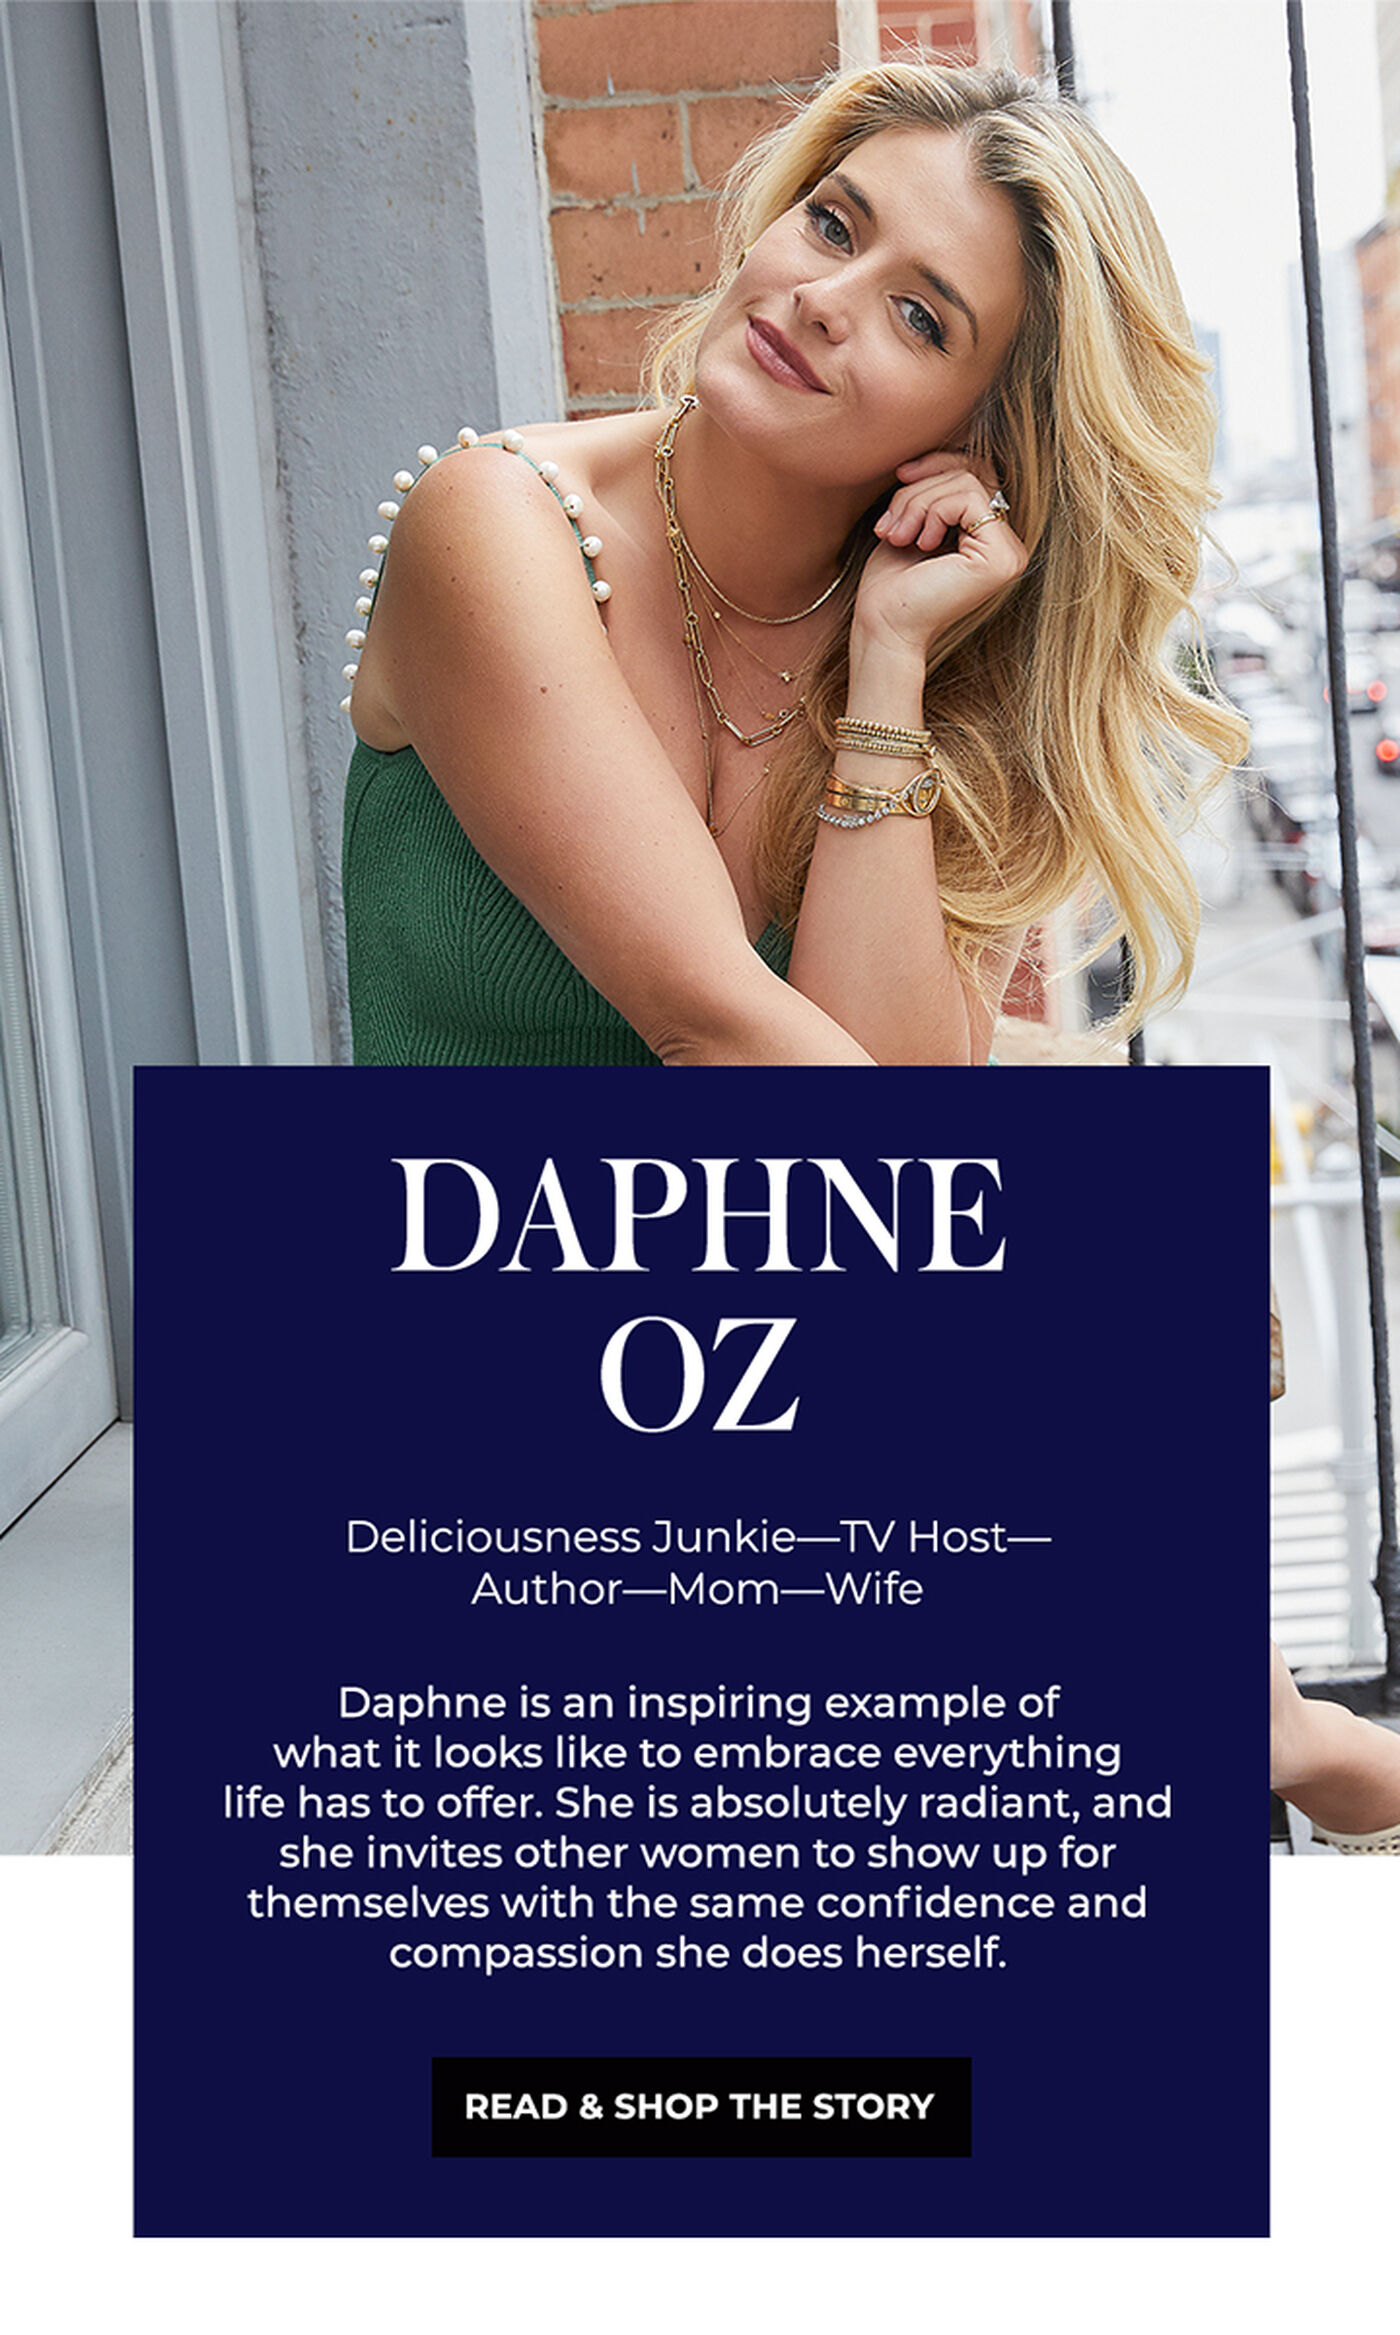 "DAPHNE OZ Deliciousness Junkie-TV Host- Author-Mom-Wife Daphne is an inspiring example of what it looks like to embrace everything life has to offer. She is absolutely radiant, and she invites other women to show up for themselves with the same confidence and compassion she does herself."